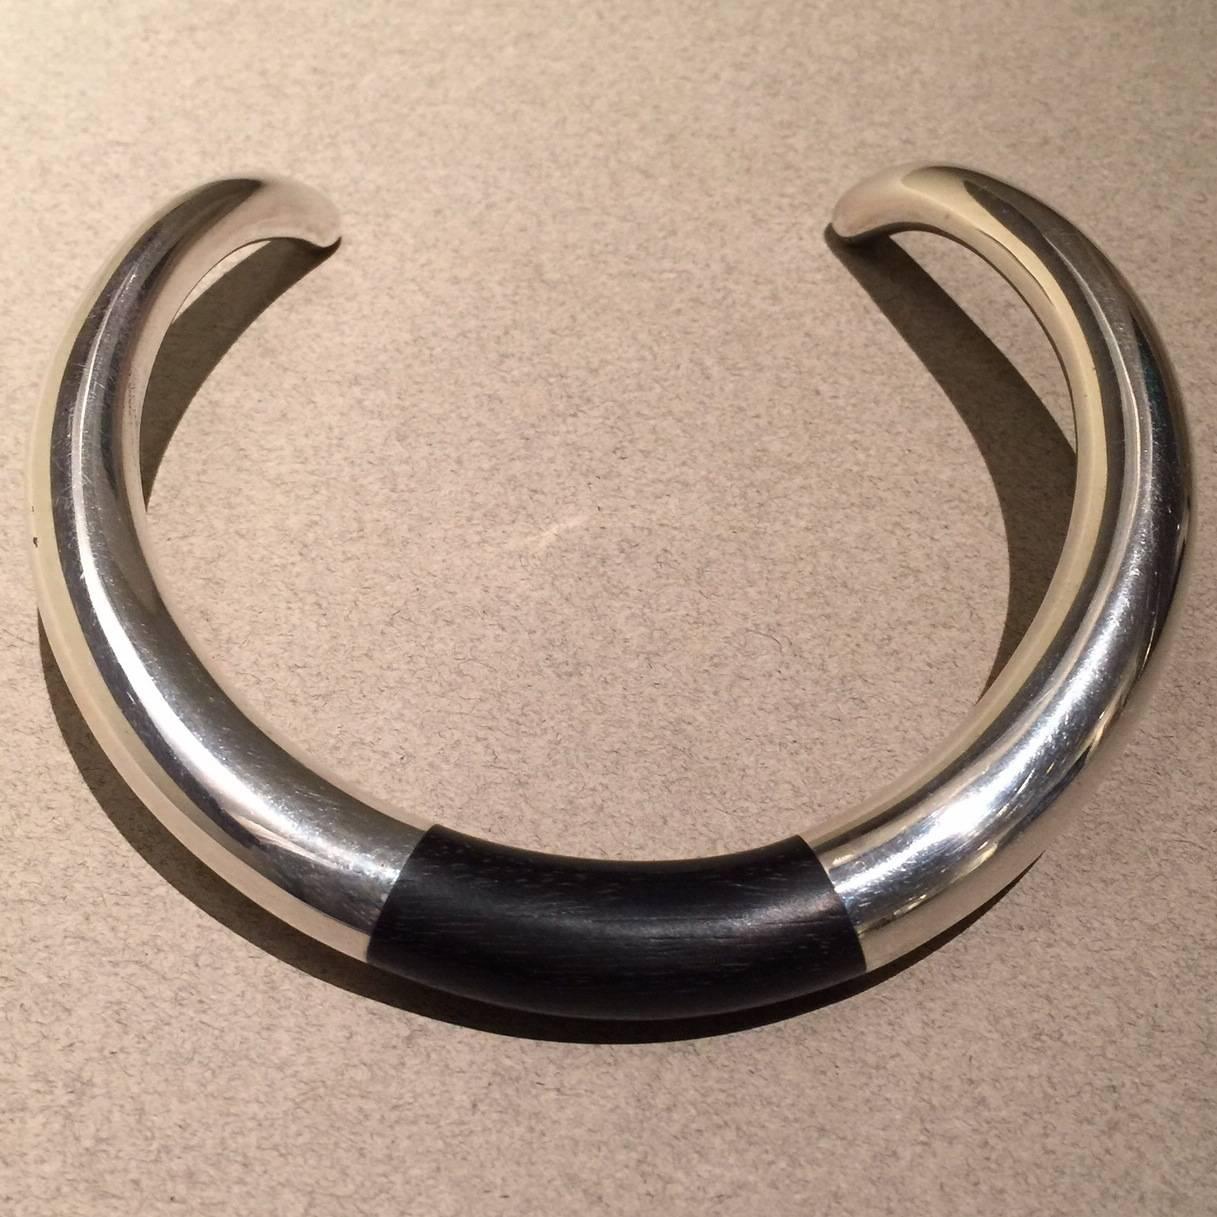 Georg Jensen Sterling Silver and Ebony Neck Ring No. A29A by Anne Ammitzbøll

Fabulous vintage piece from 1978. Bold, modern design. Neck ring is in excellent condition.

Please note that this piece is for a person with a petite neck. 

Dimensions: